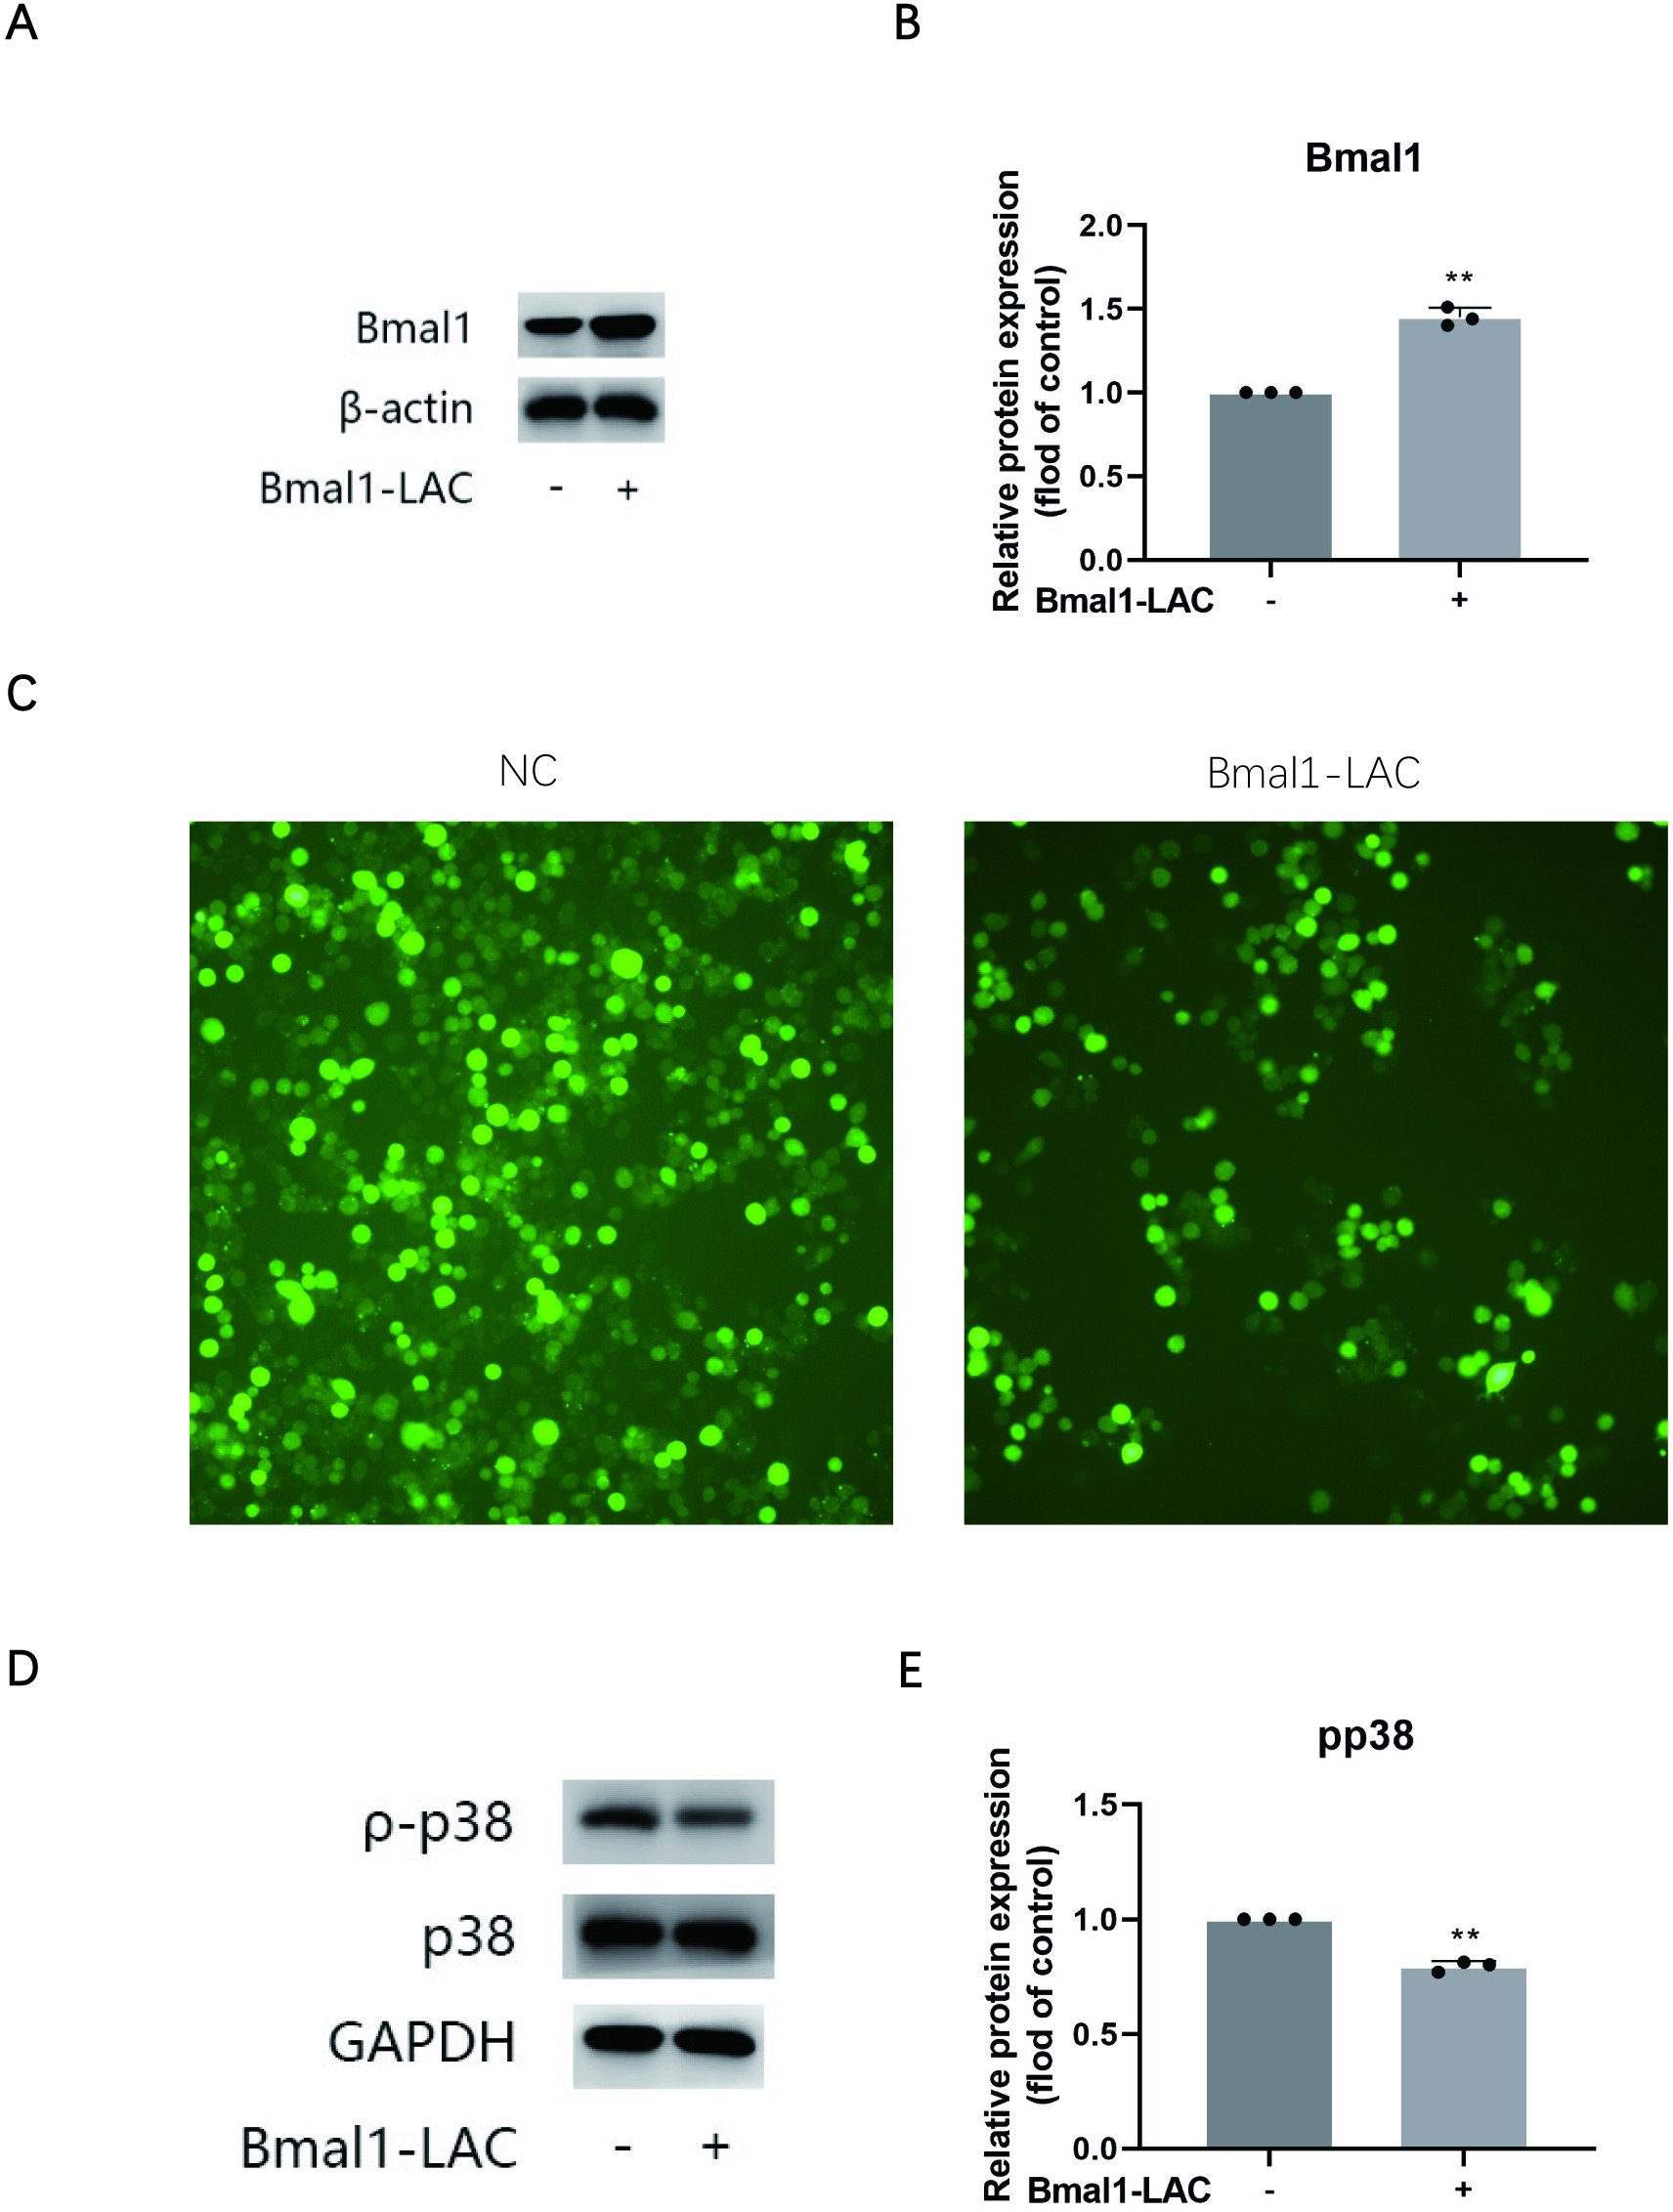 Fig. 7 
            BMAL1 attenuates the activation of reactive oxygen species (ROS) and phosphorylation of p38. a) Protein expression of BMAL1 and β-actin indicated the effect of BMAL1 lentiviral activation particles (BMAL1-LAC). b) Relative protein expression levels of the proteins in a). c) ROS were detected by a fluorescent probe after application with BMAL1-LAC. d) Protein expression of phosphorylated p38, p38, and glyceraldehyde 3-phosphate dehydrogenase (GAPDH) indicated the effect of application with BMAL1-LAC. e) Relative protein expression levels of the proteins in d). Experiments were implemented in triplicate. Data are means and standard deviations; *p < 0.05, **p < 0.01 compared with control cells analyzed by using one-way analysis of variance.
          